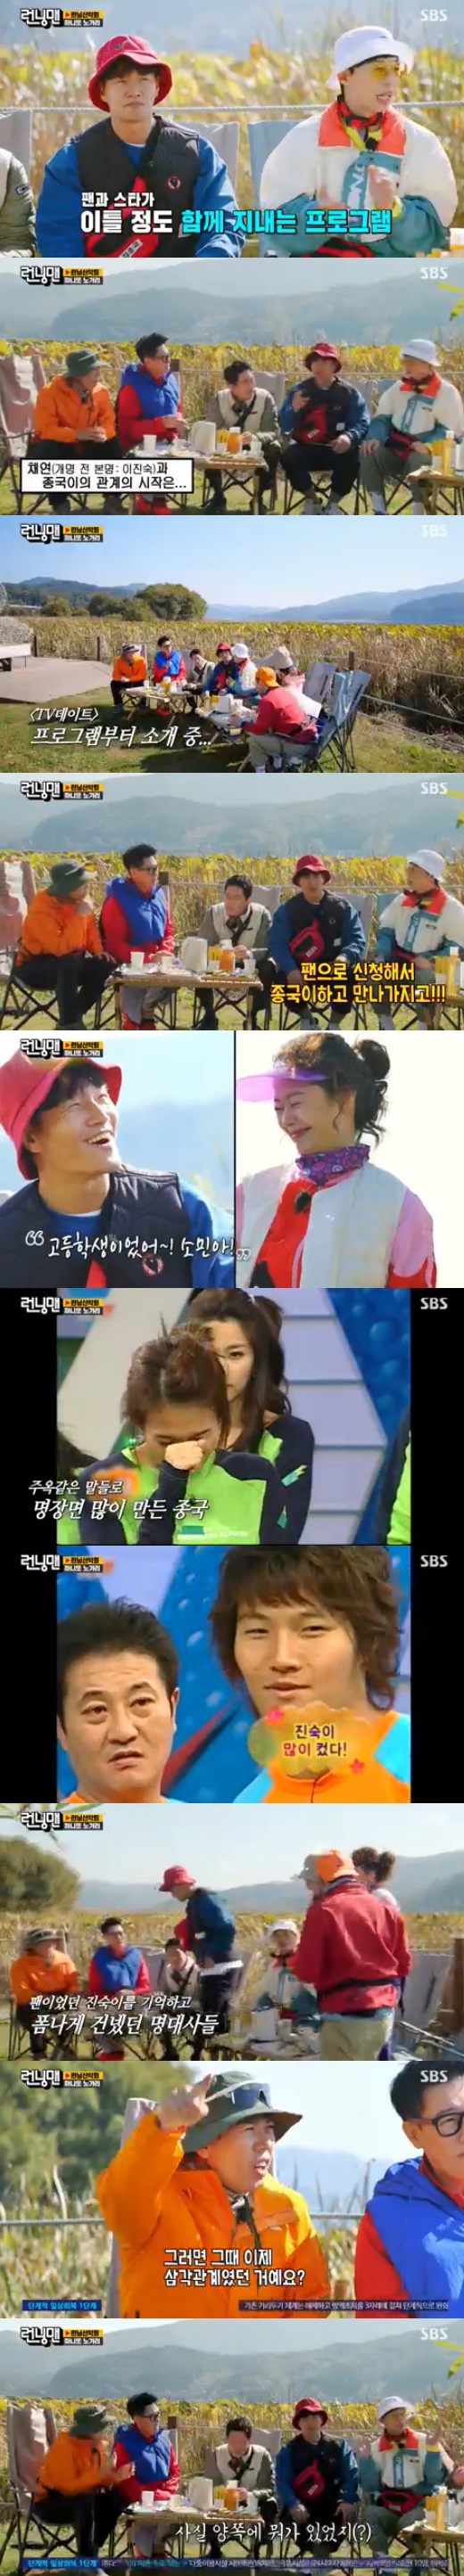 In Running Man, singer Kim Jong-kook told her extraordinary relationship with Chae Yeon.SBS Running Man, which was broadcasted on the afternoon of the 7th, was depicted as Memories of Nogari mission.On this day, Kim Jong-kook asked the members to Tell me about the story that Chae Yeon liked you.Kim Jong-kook said, I met Chae Yeon in a program called Star Date when he was a high school student, Jin Sook (pre-named name).Jin Sook was my fan and met me as an entertainer. However, Yang Se-chan said, Then was the triangle relationship? And even his best friend Jang Hyuk laughed, It was not a triangle relationship, but something on both sides.